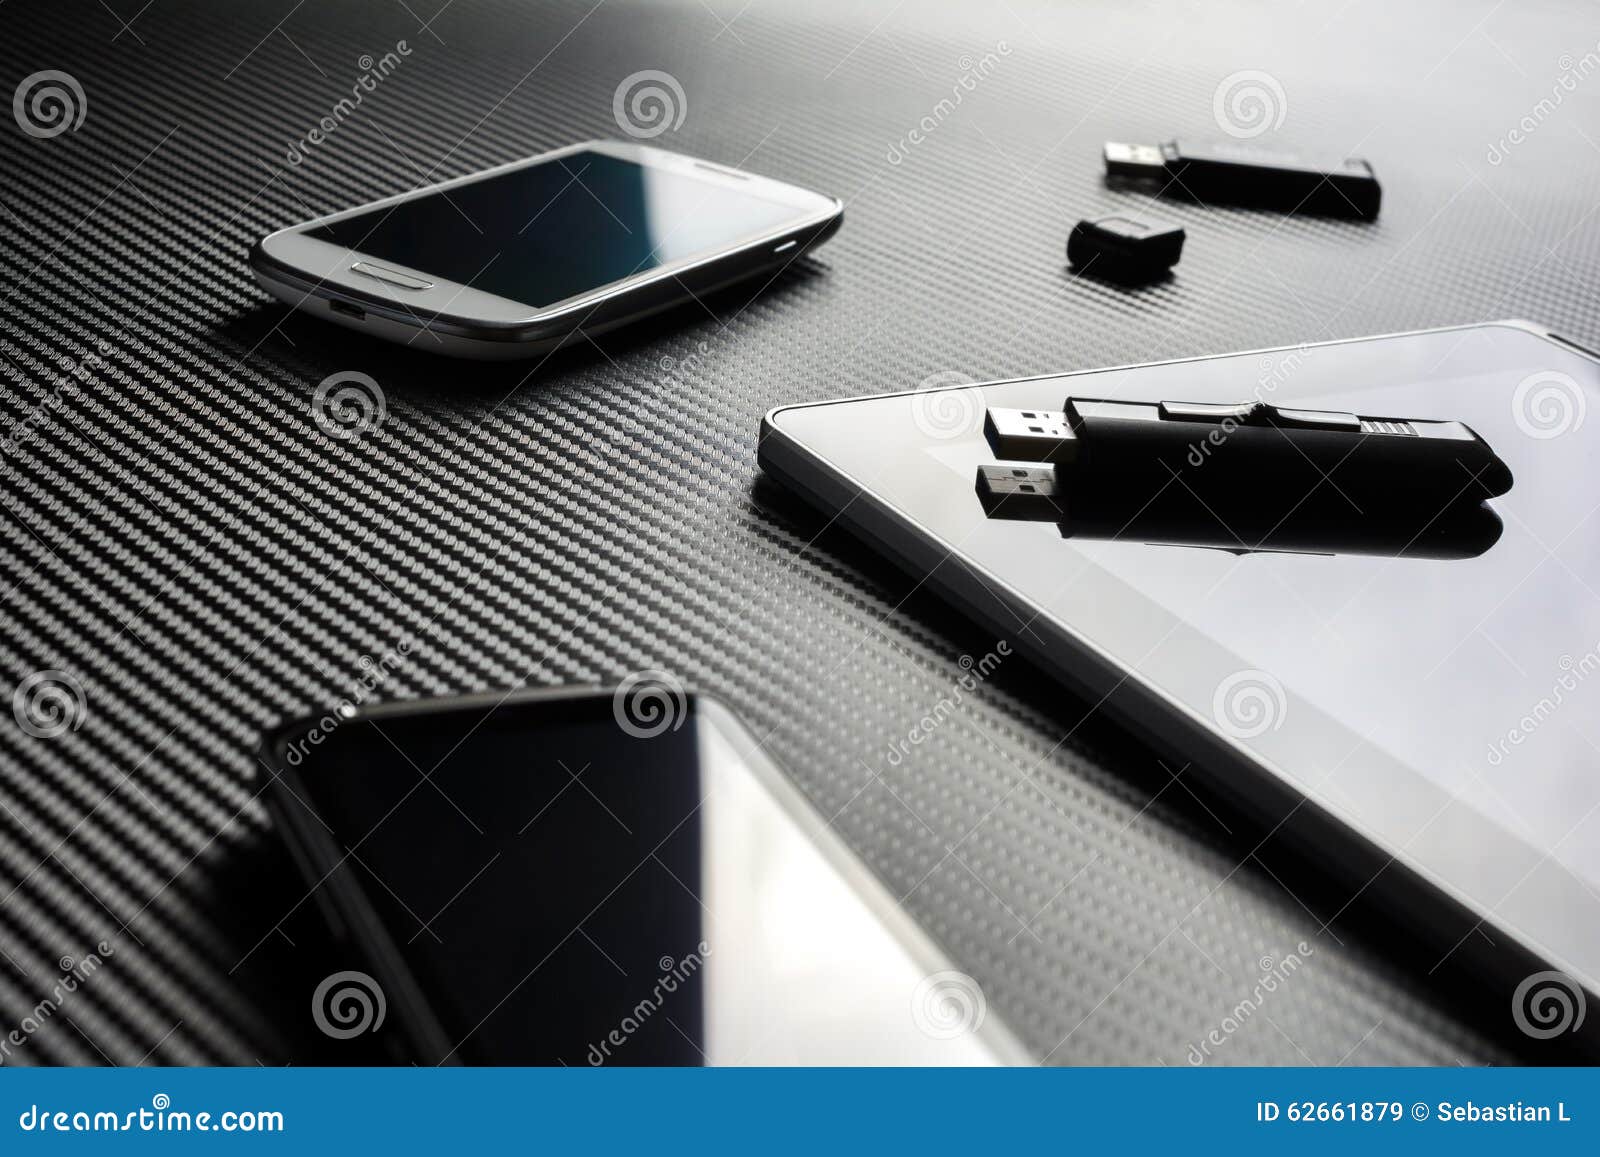 2 business mobiles with reflections and an usb drive lying next to a blank tablet with usb drive on top, all above a carbon layer